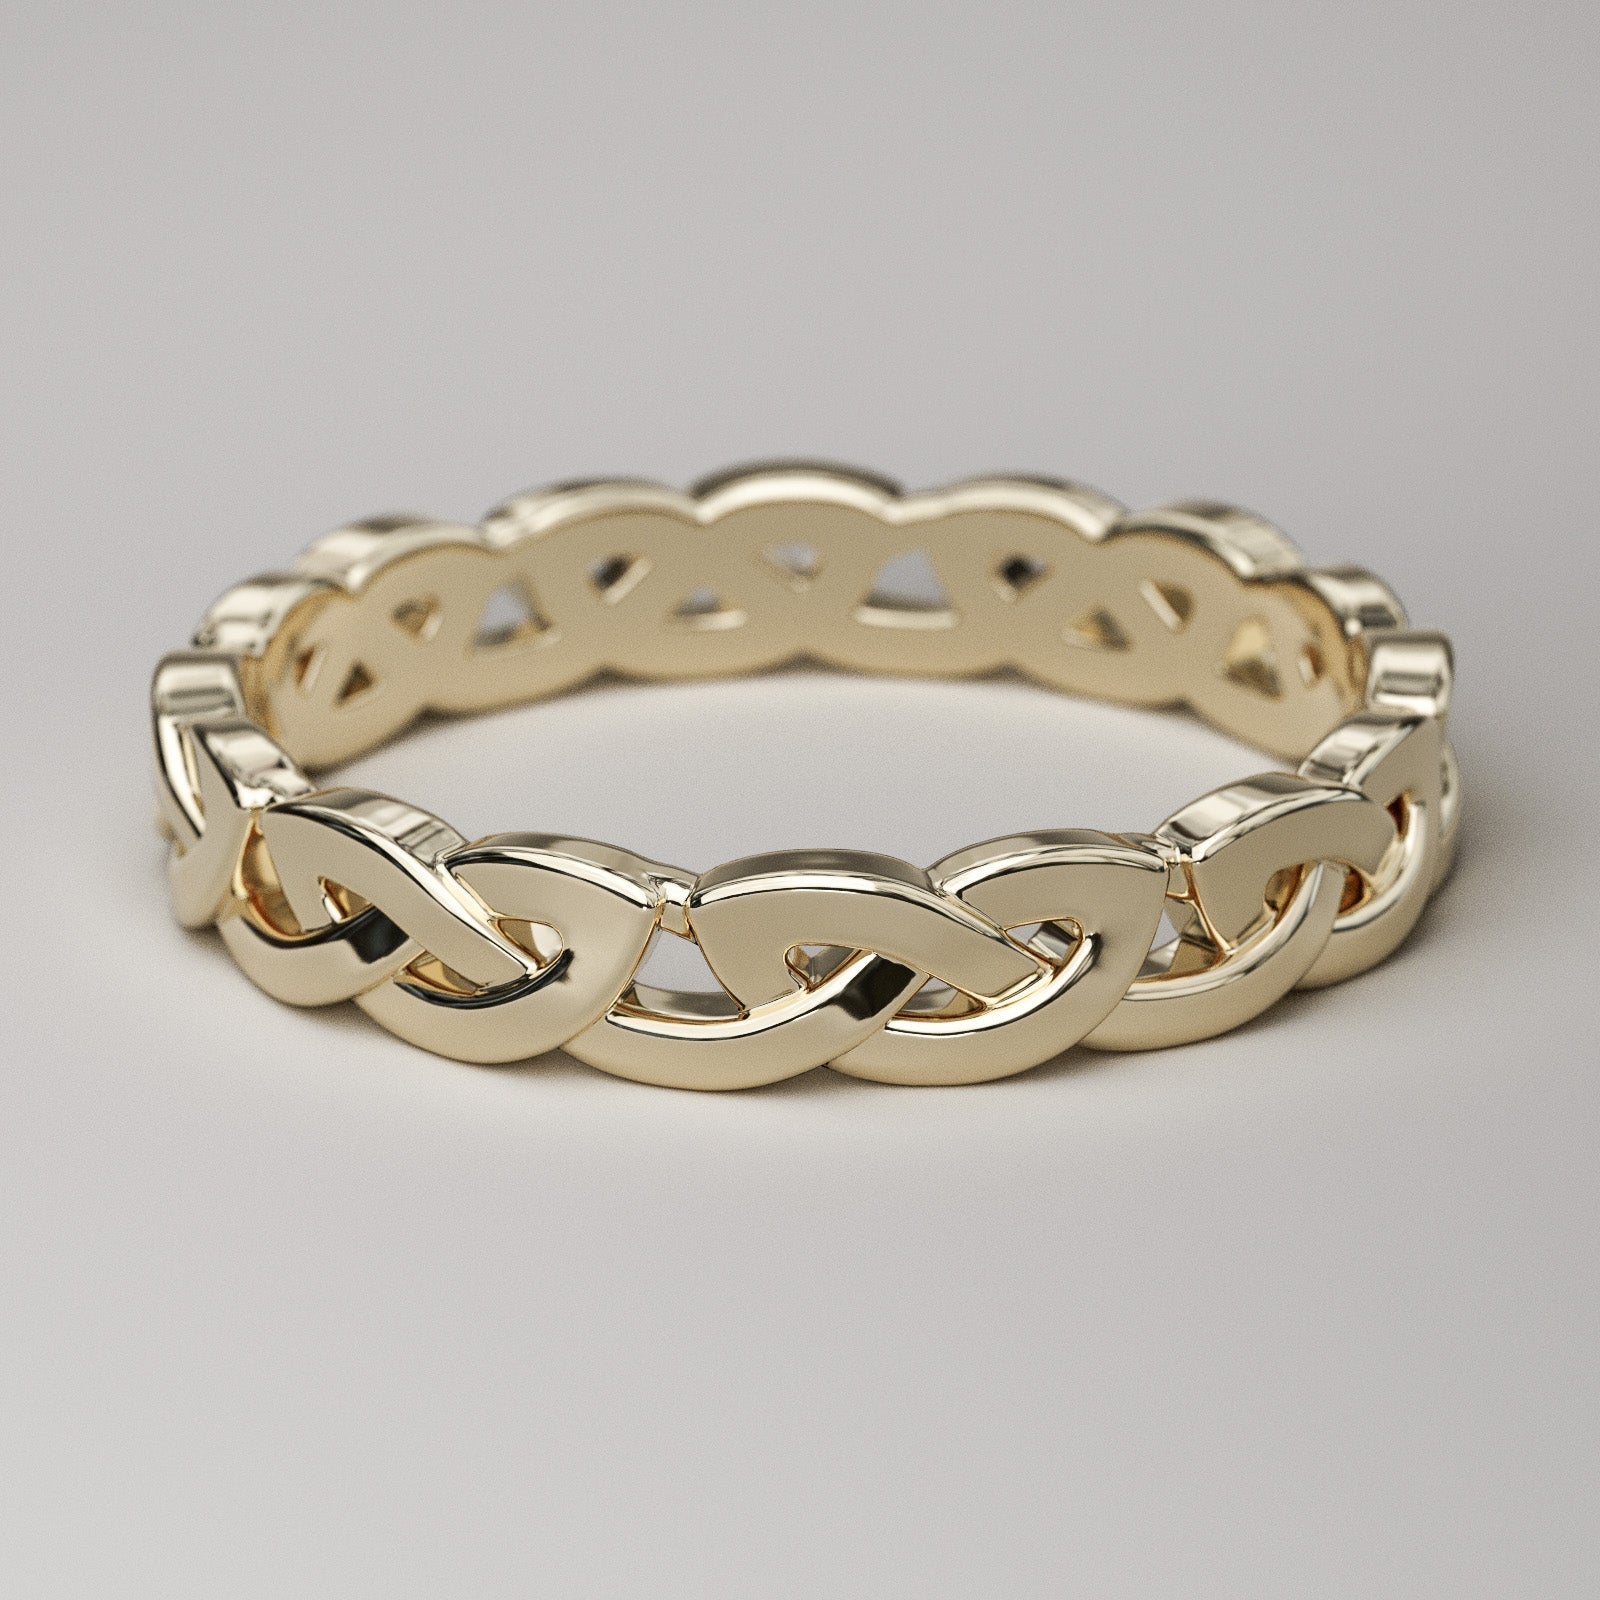 Yellow gold Celtic wedding band - overhand knot eternity ring for women